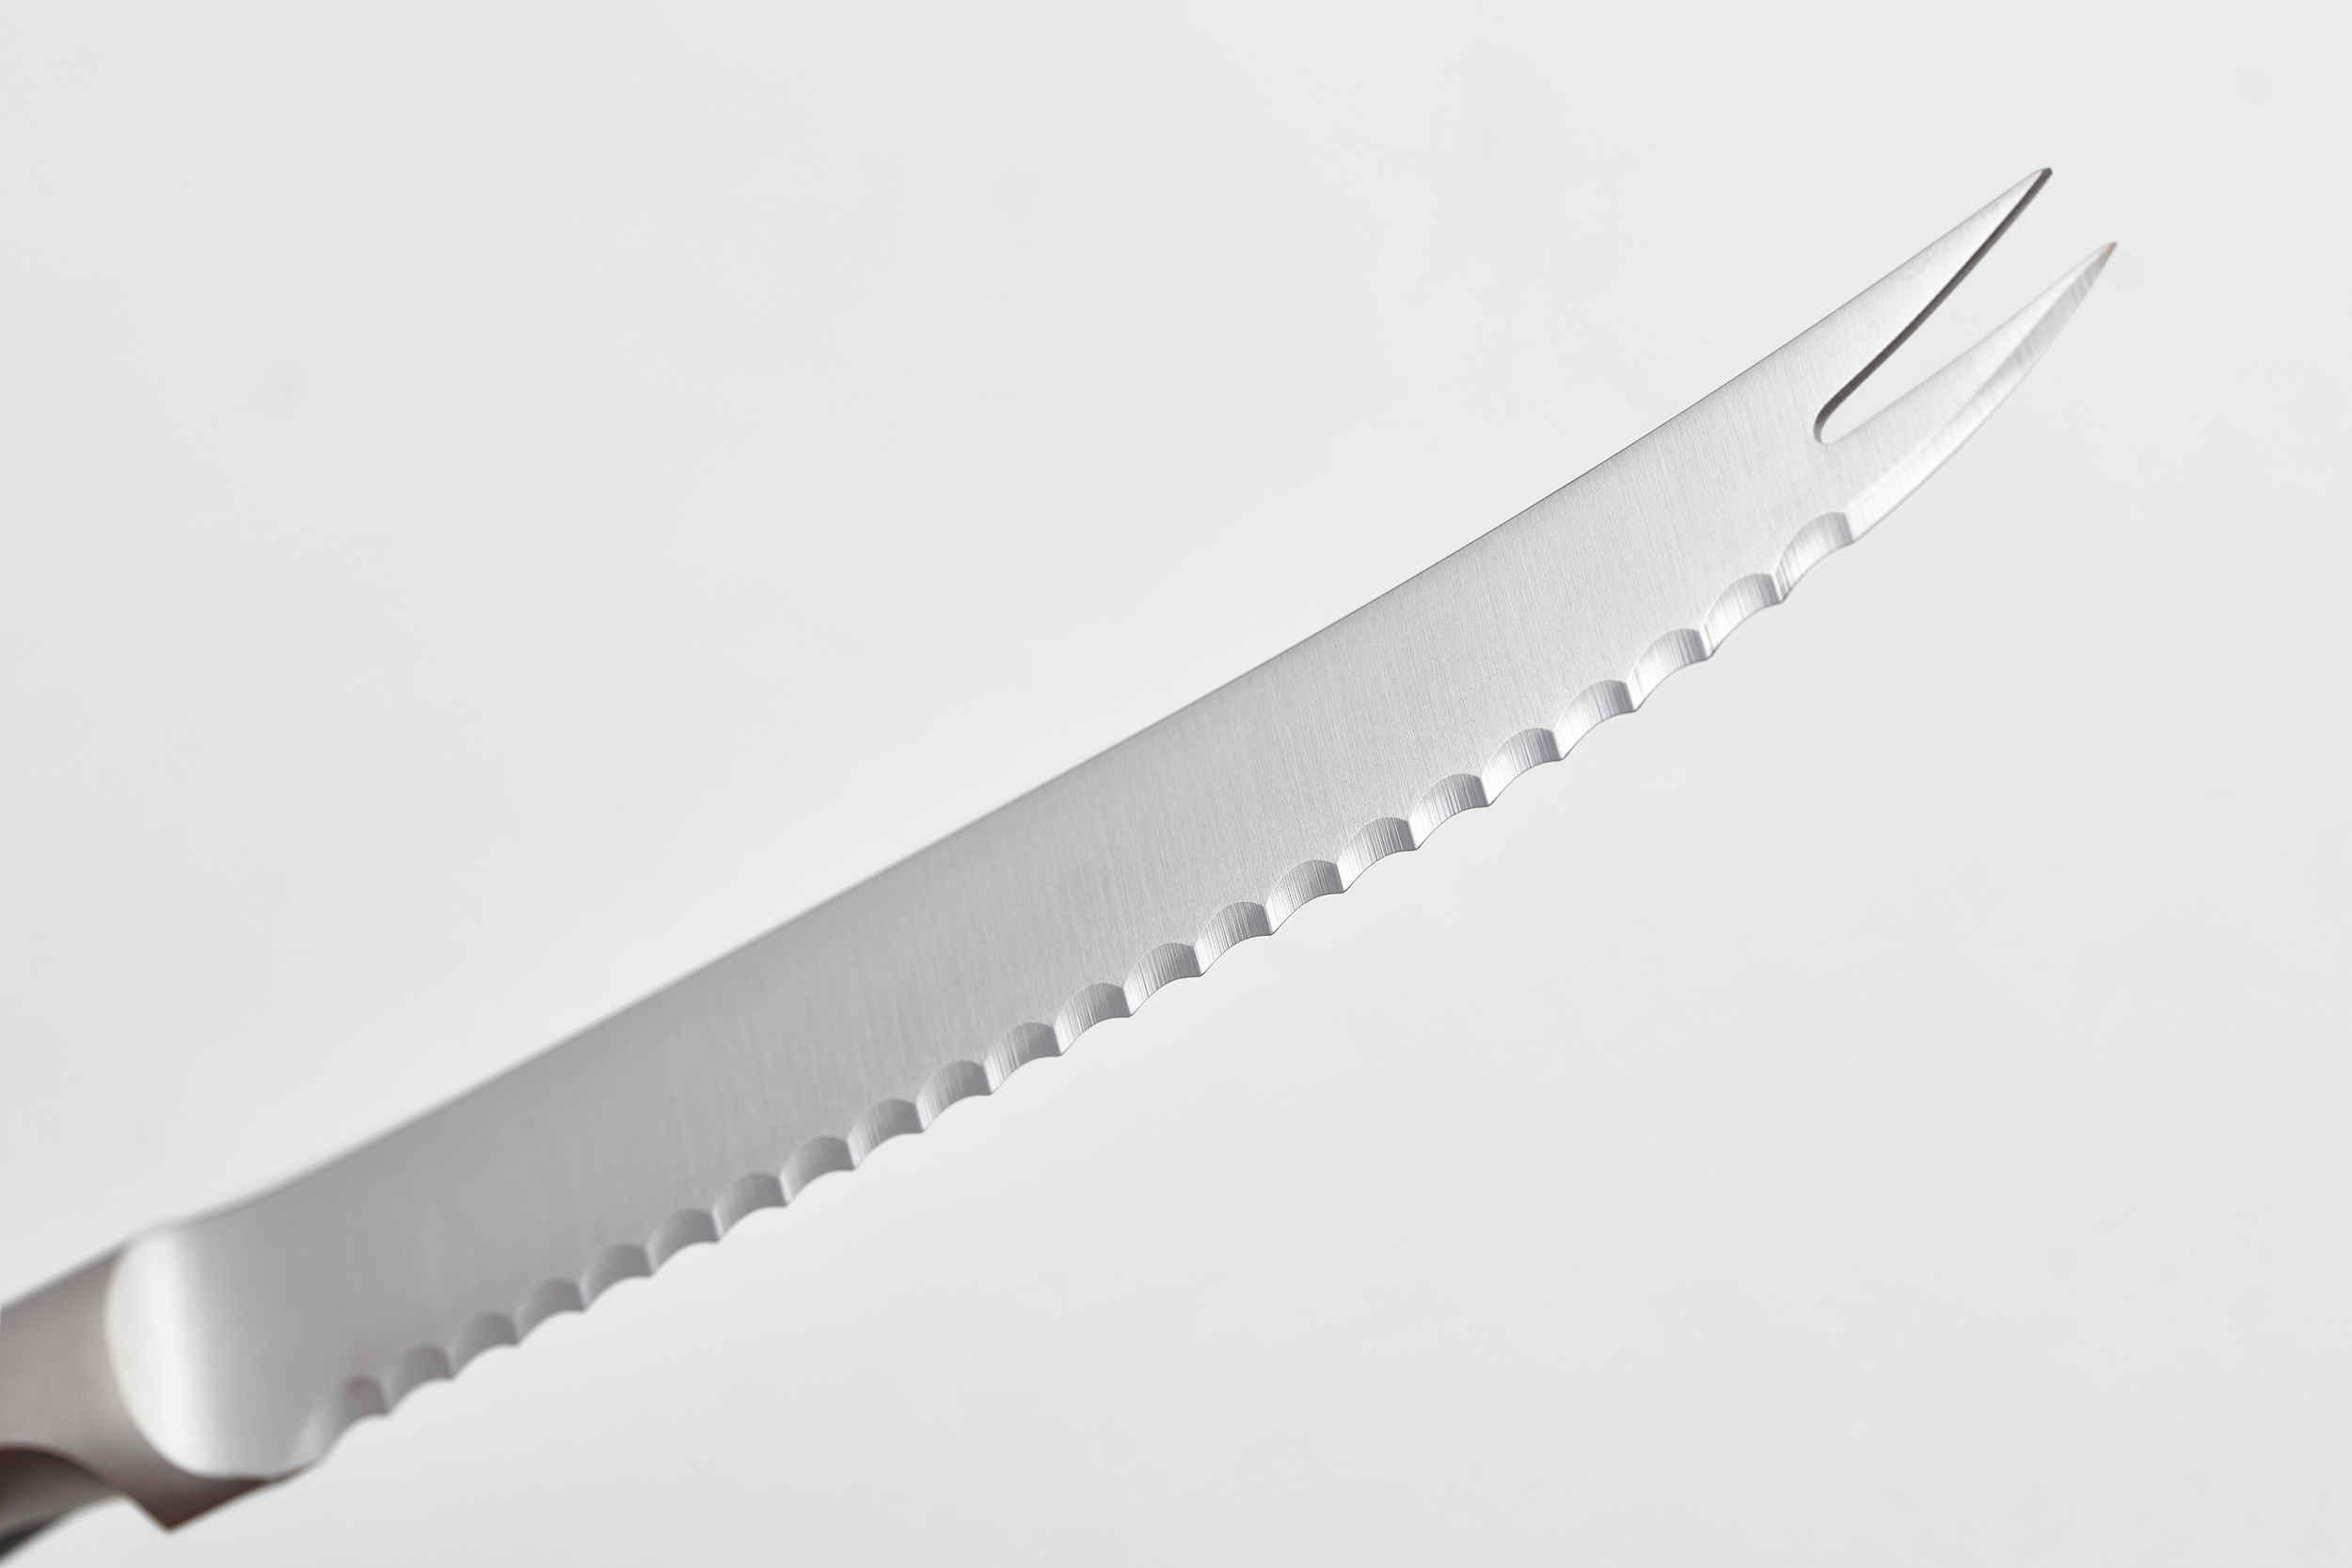 Wusthof Classic 5 Tomato Knife - The Kitchen Table